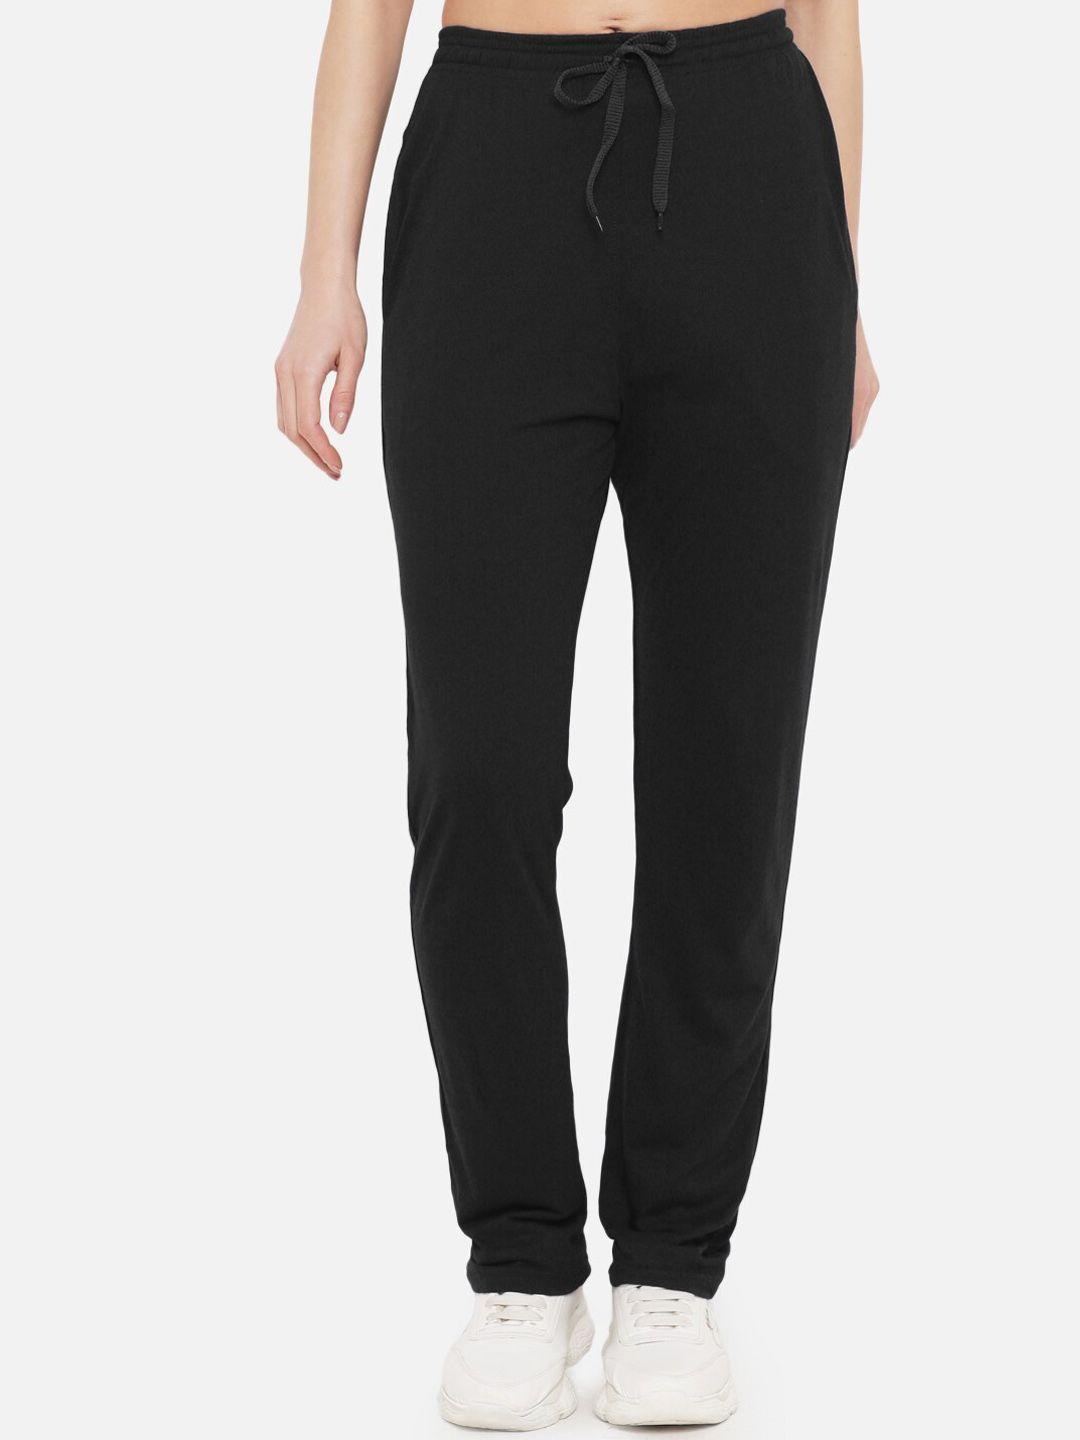 fflirtygo women black solid relaxed fit cotton track pants